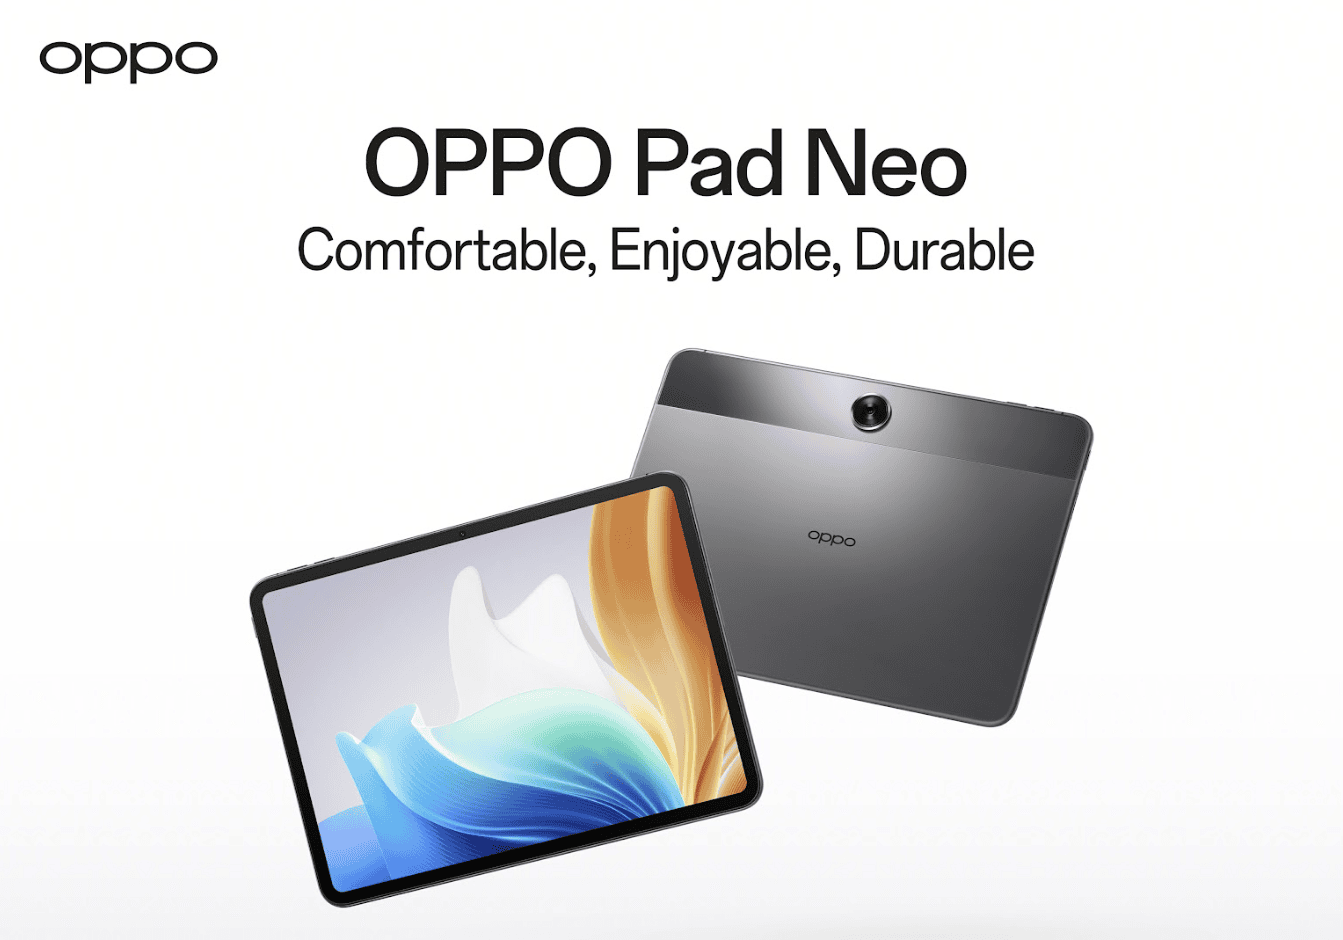 OPPO Pad Neo Launches in Australia, a Tablet with Affordable Price